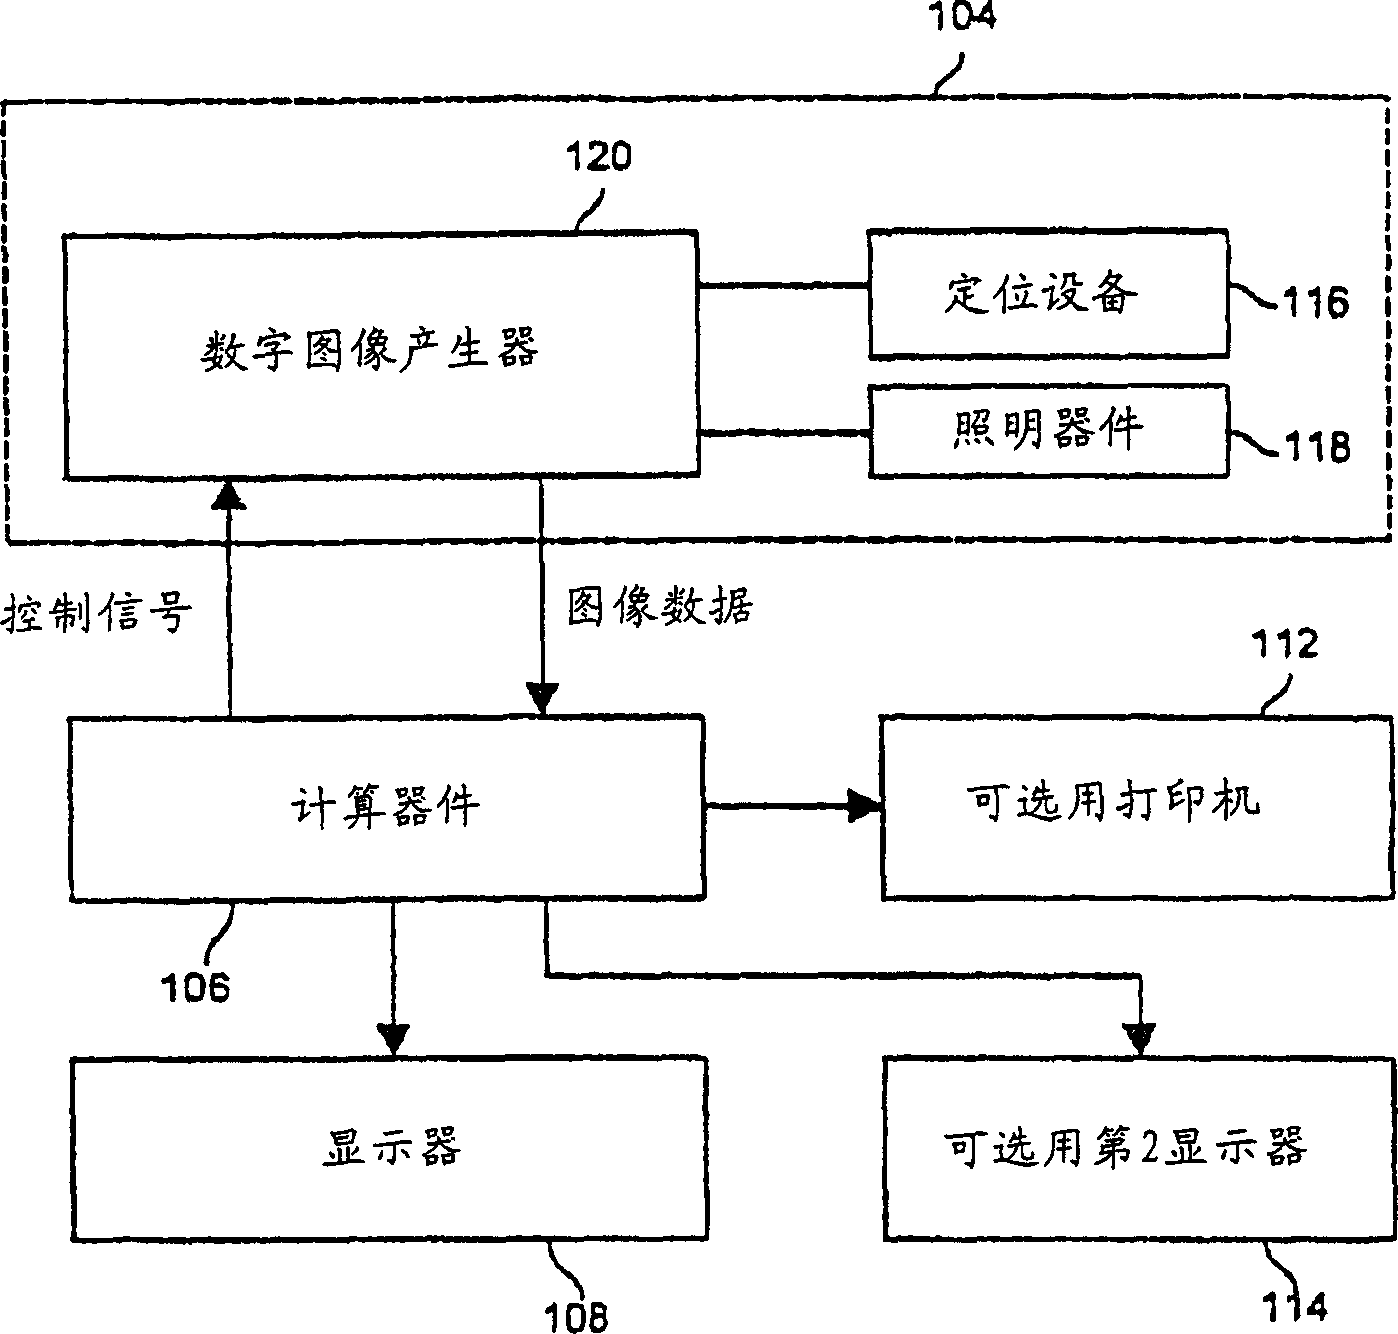 Skin imaging and analysis system and method